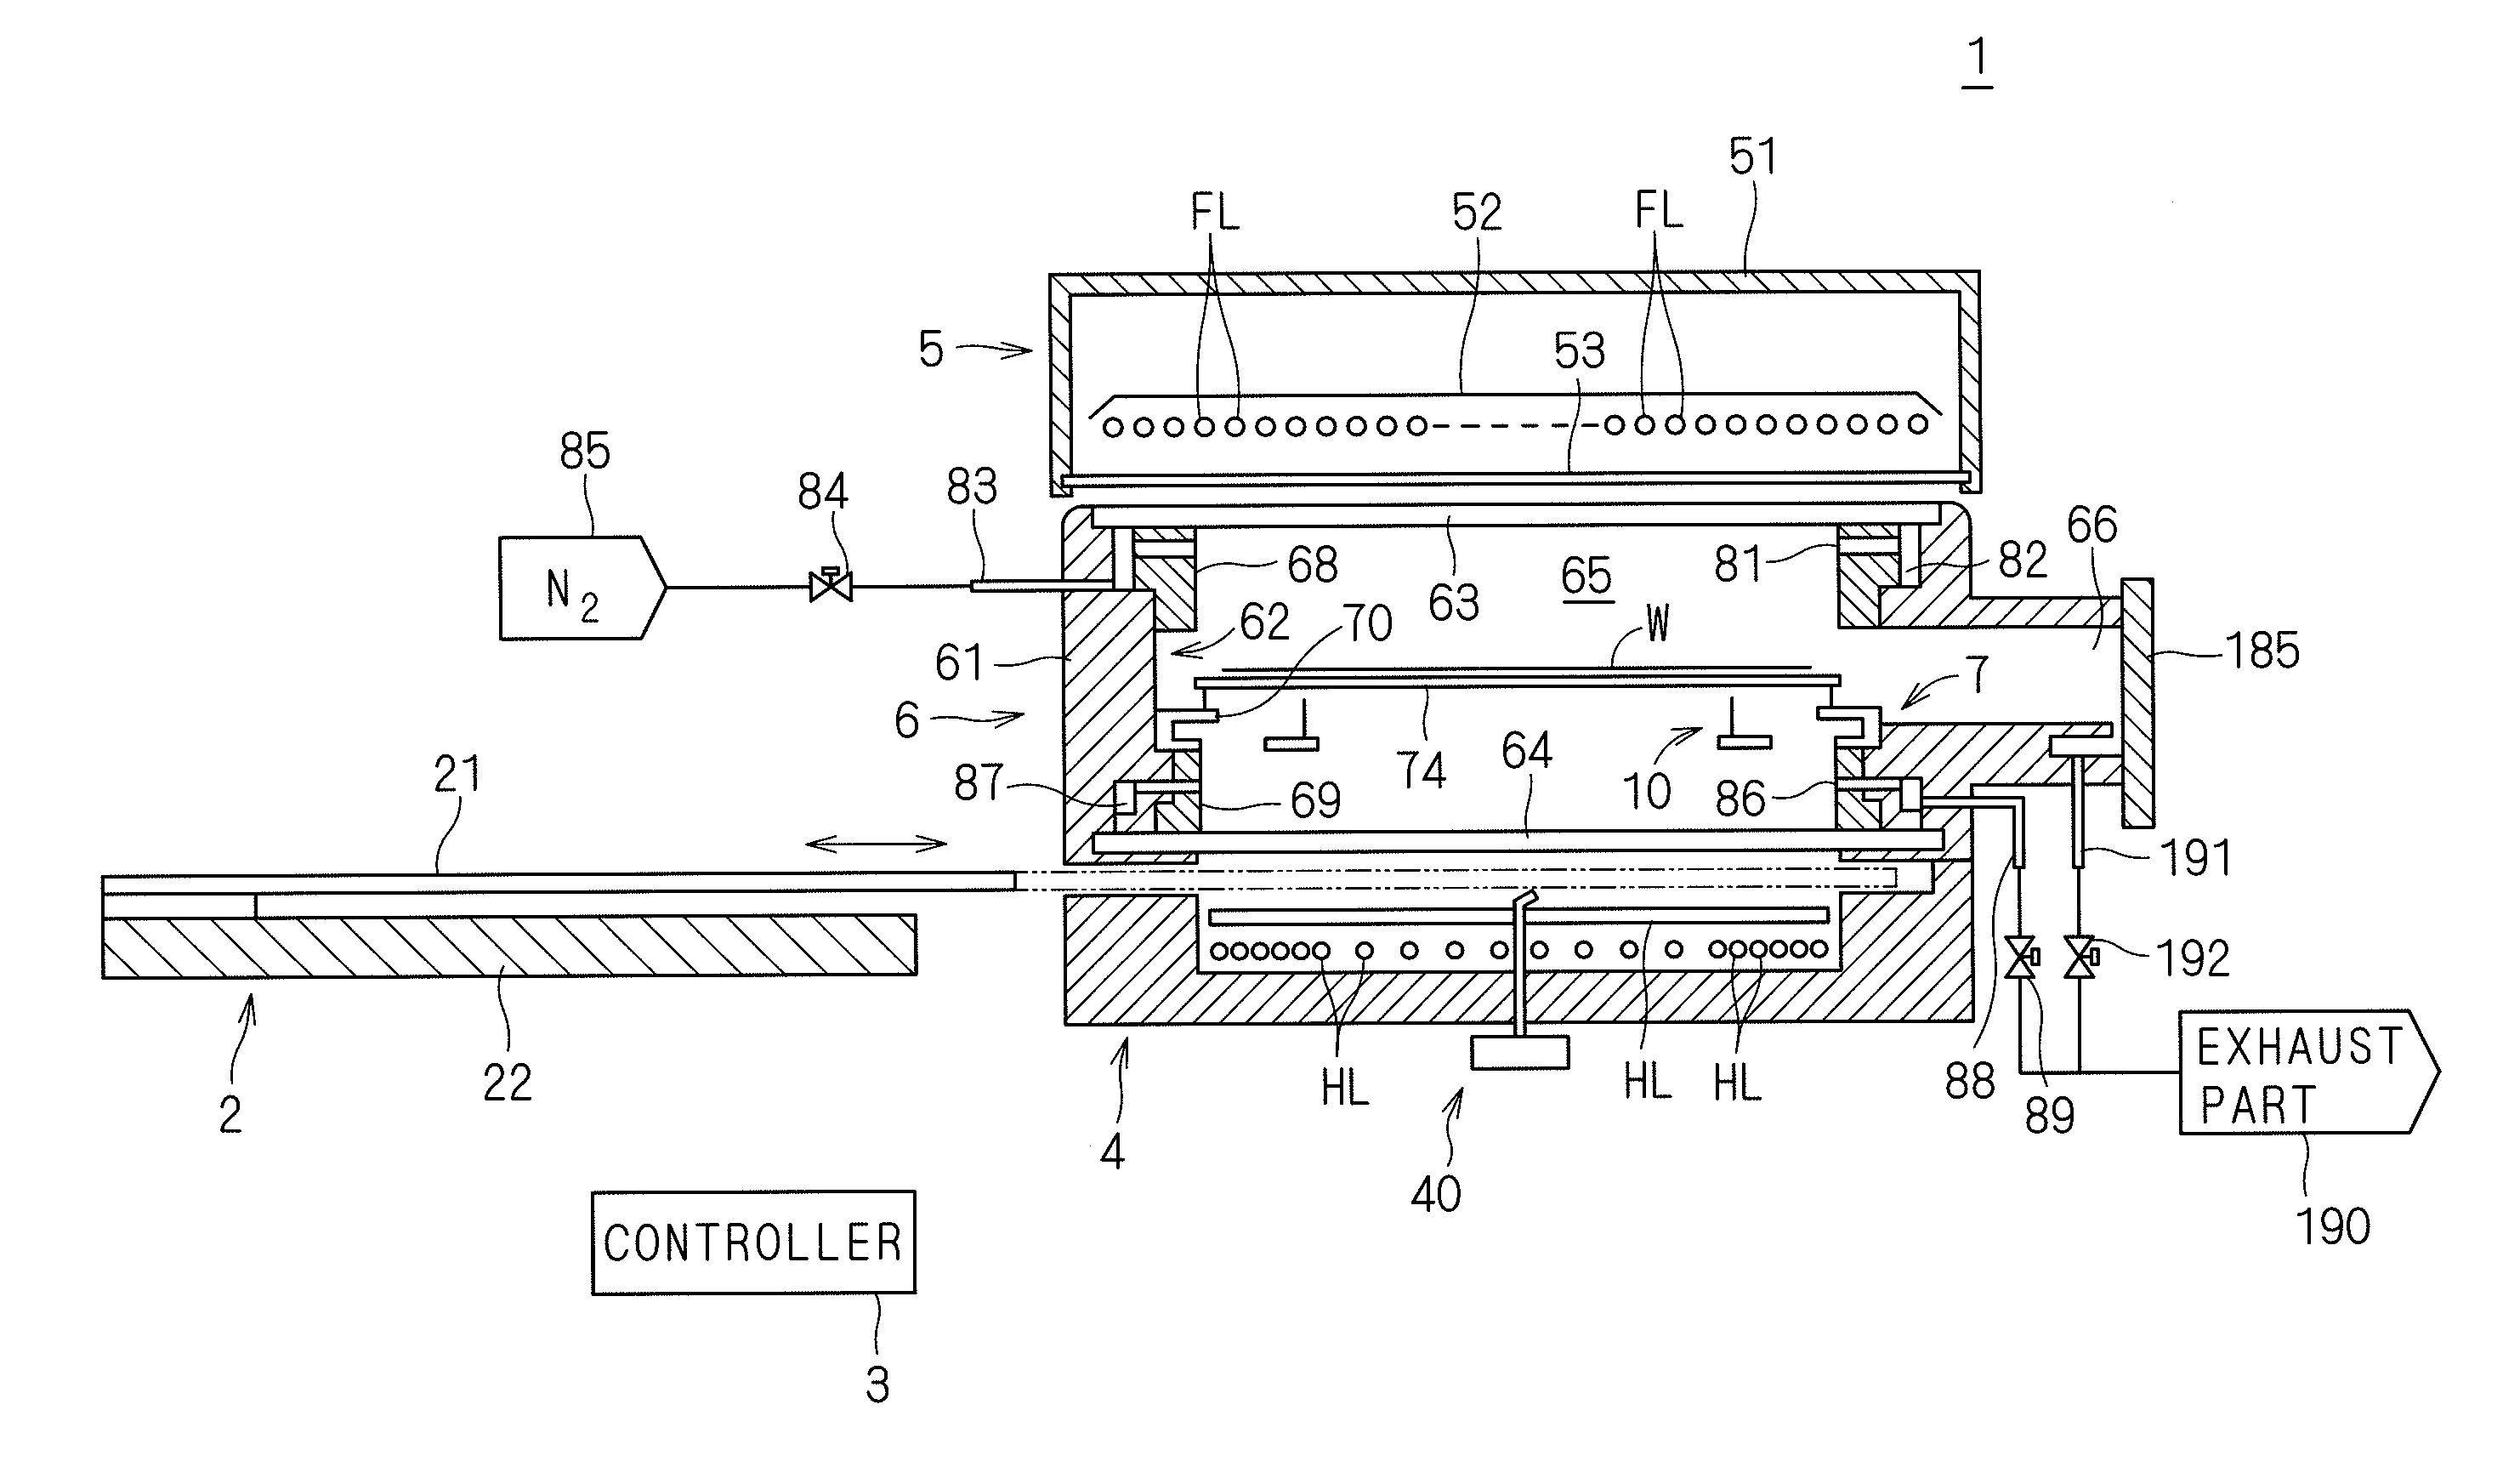 Heat treatment apparatus for heating substrate by irradiating substrate with flashes of light